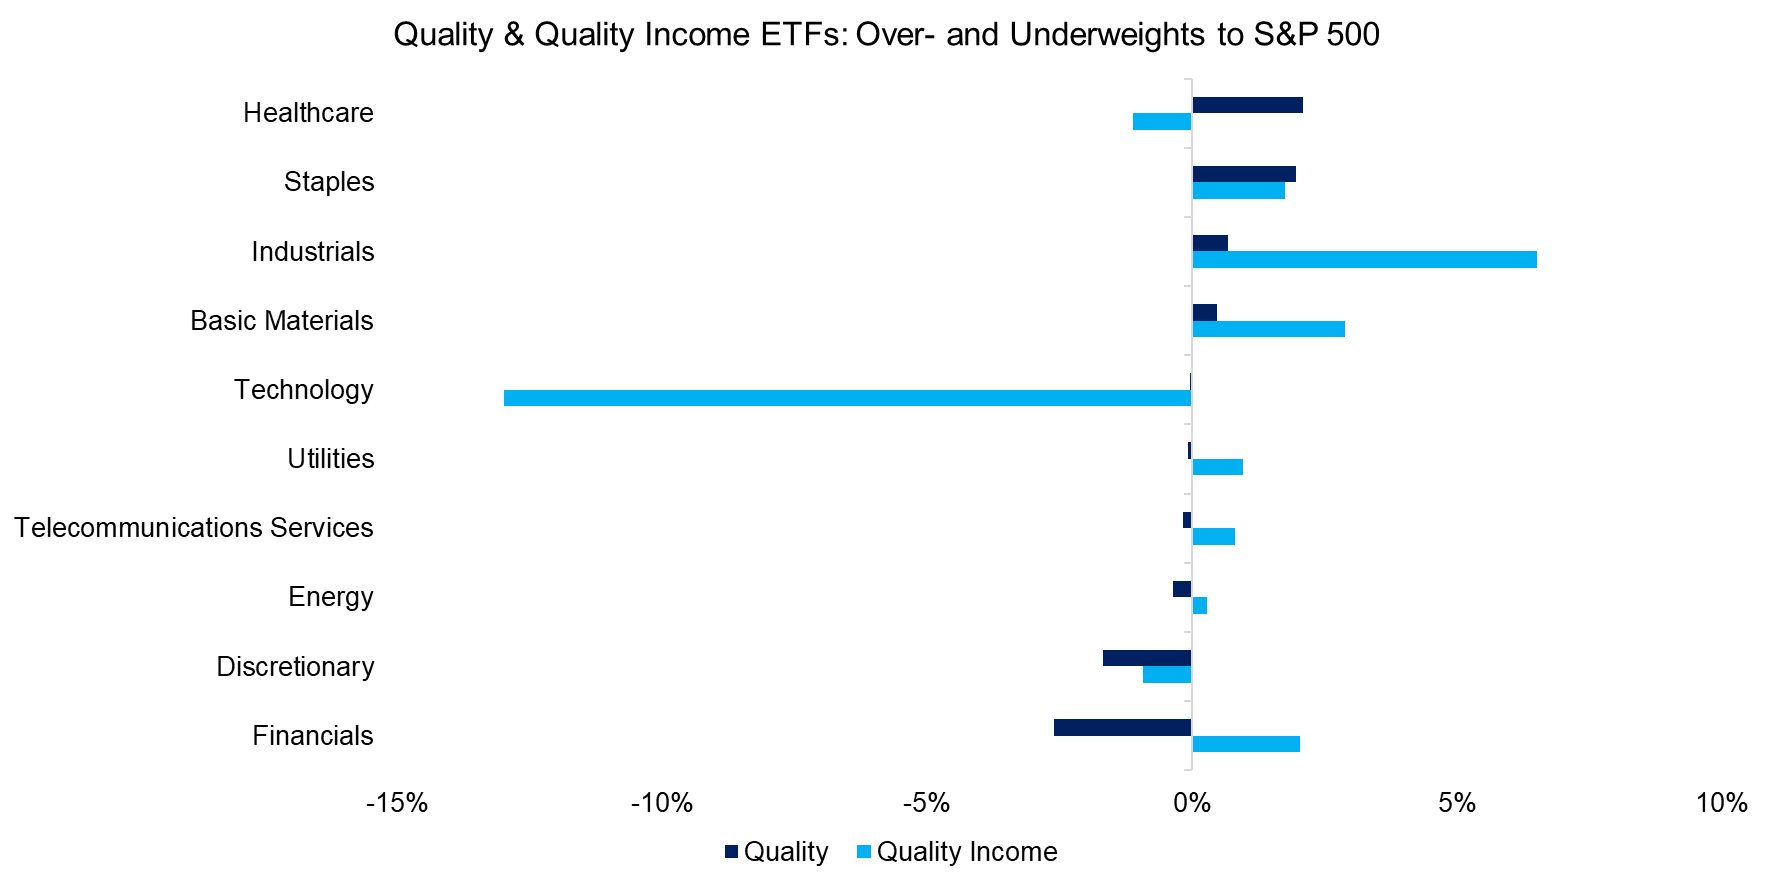 Quality & Quality Income ETFs Over- and Underweights to S&P 500